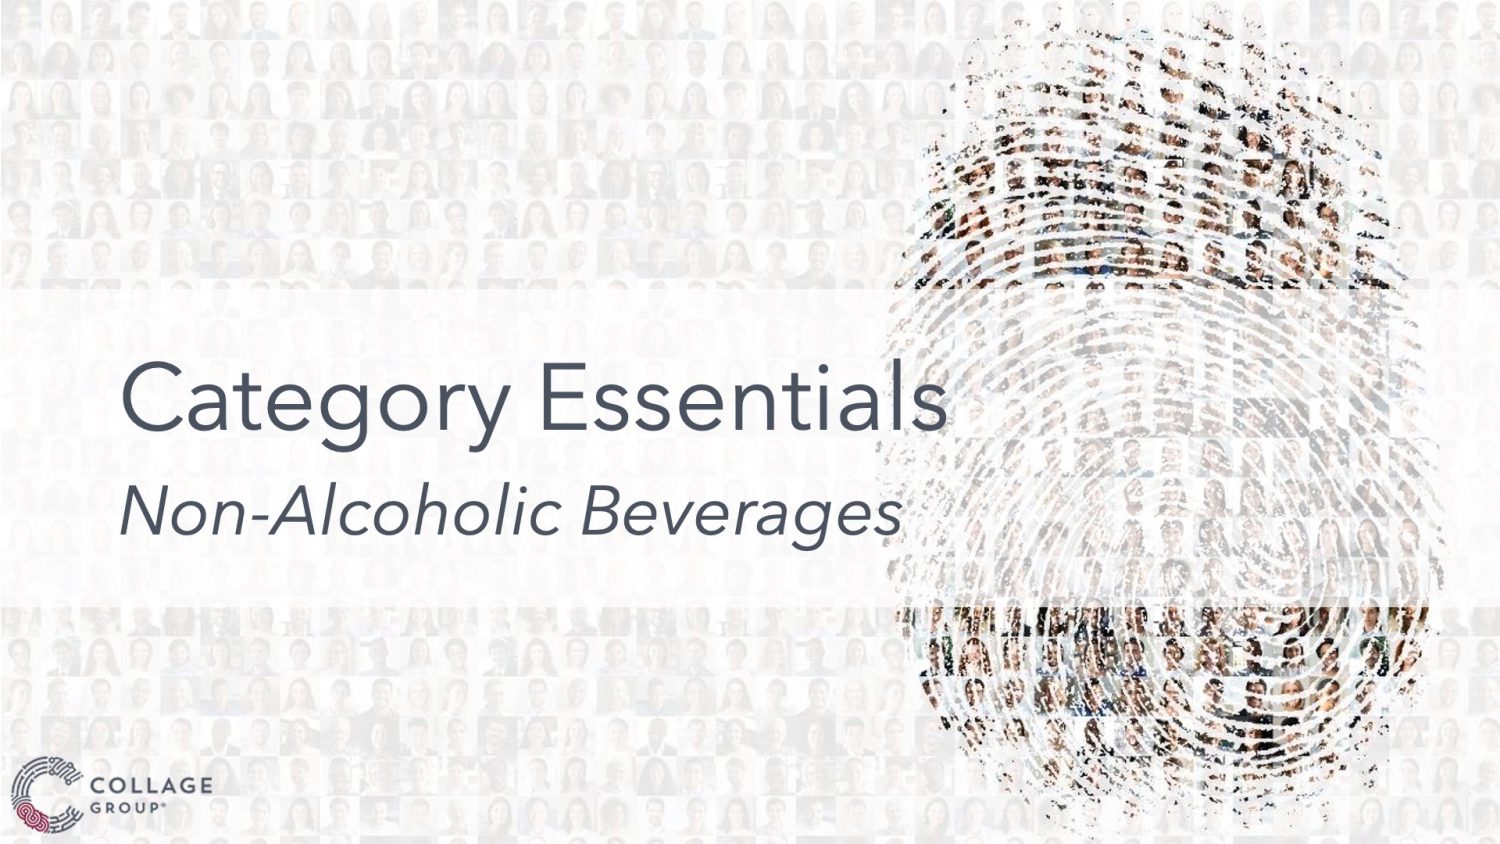 Category Essentials - Non-Alcoholic Beverages - Deck Example